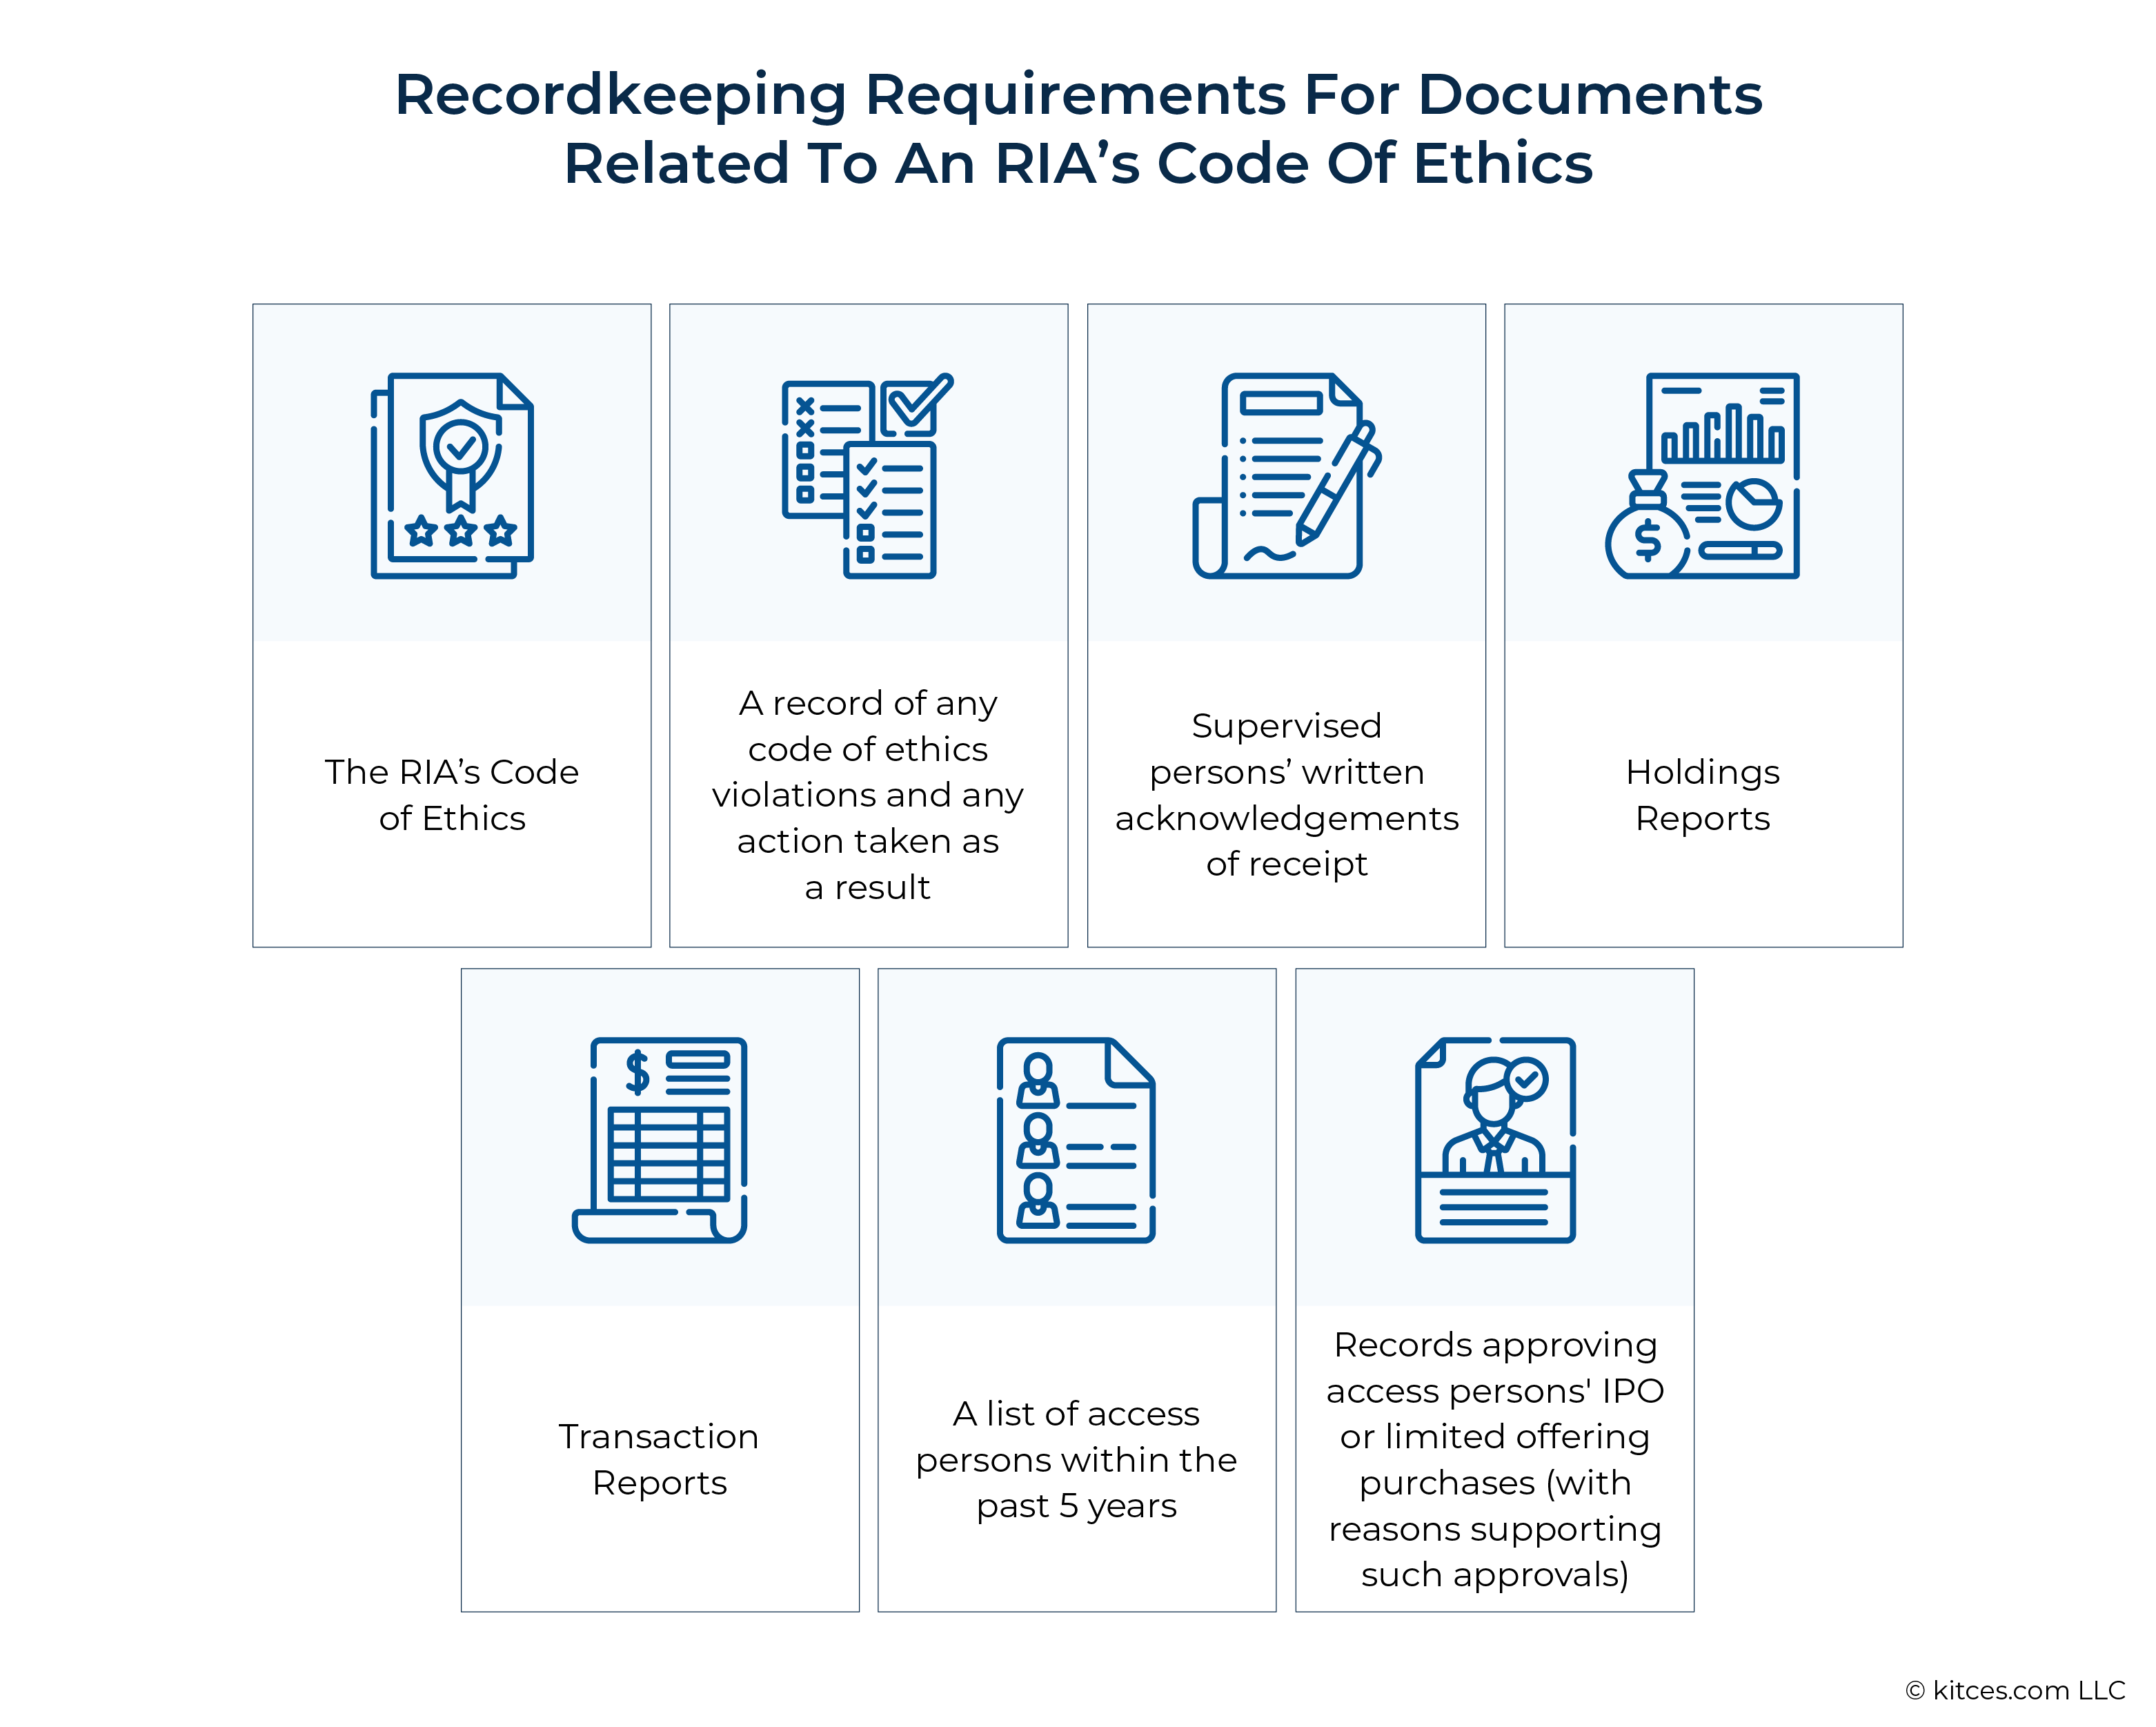 RIA Code Of Ethics Requirements For Recordkeeping Documents